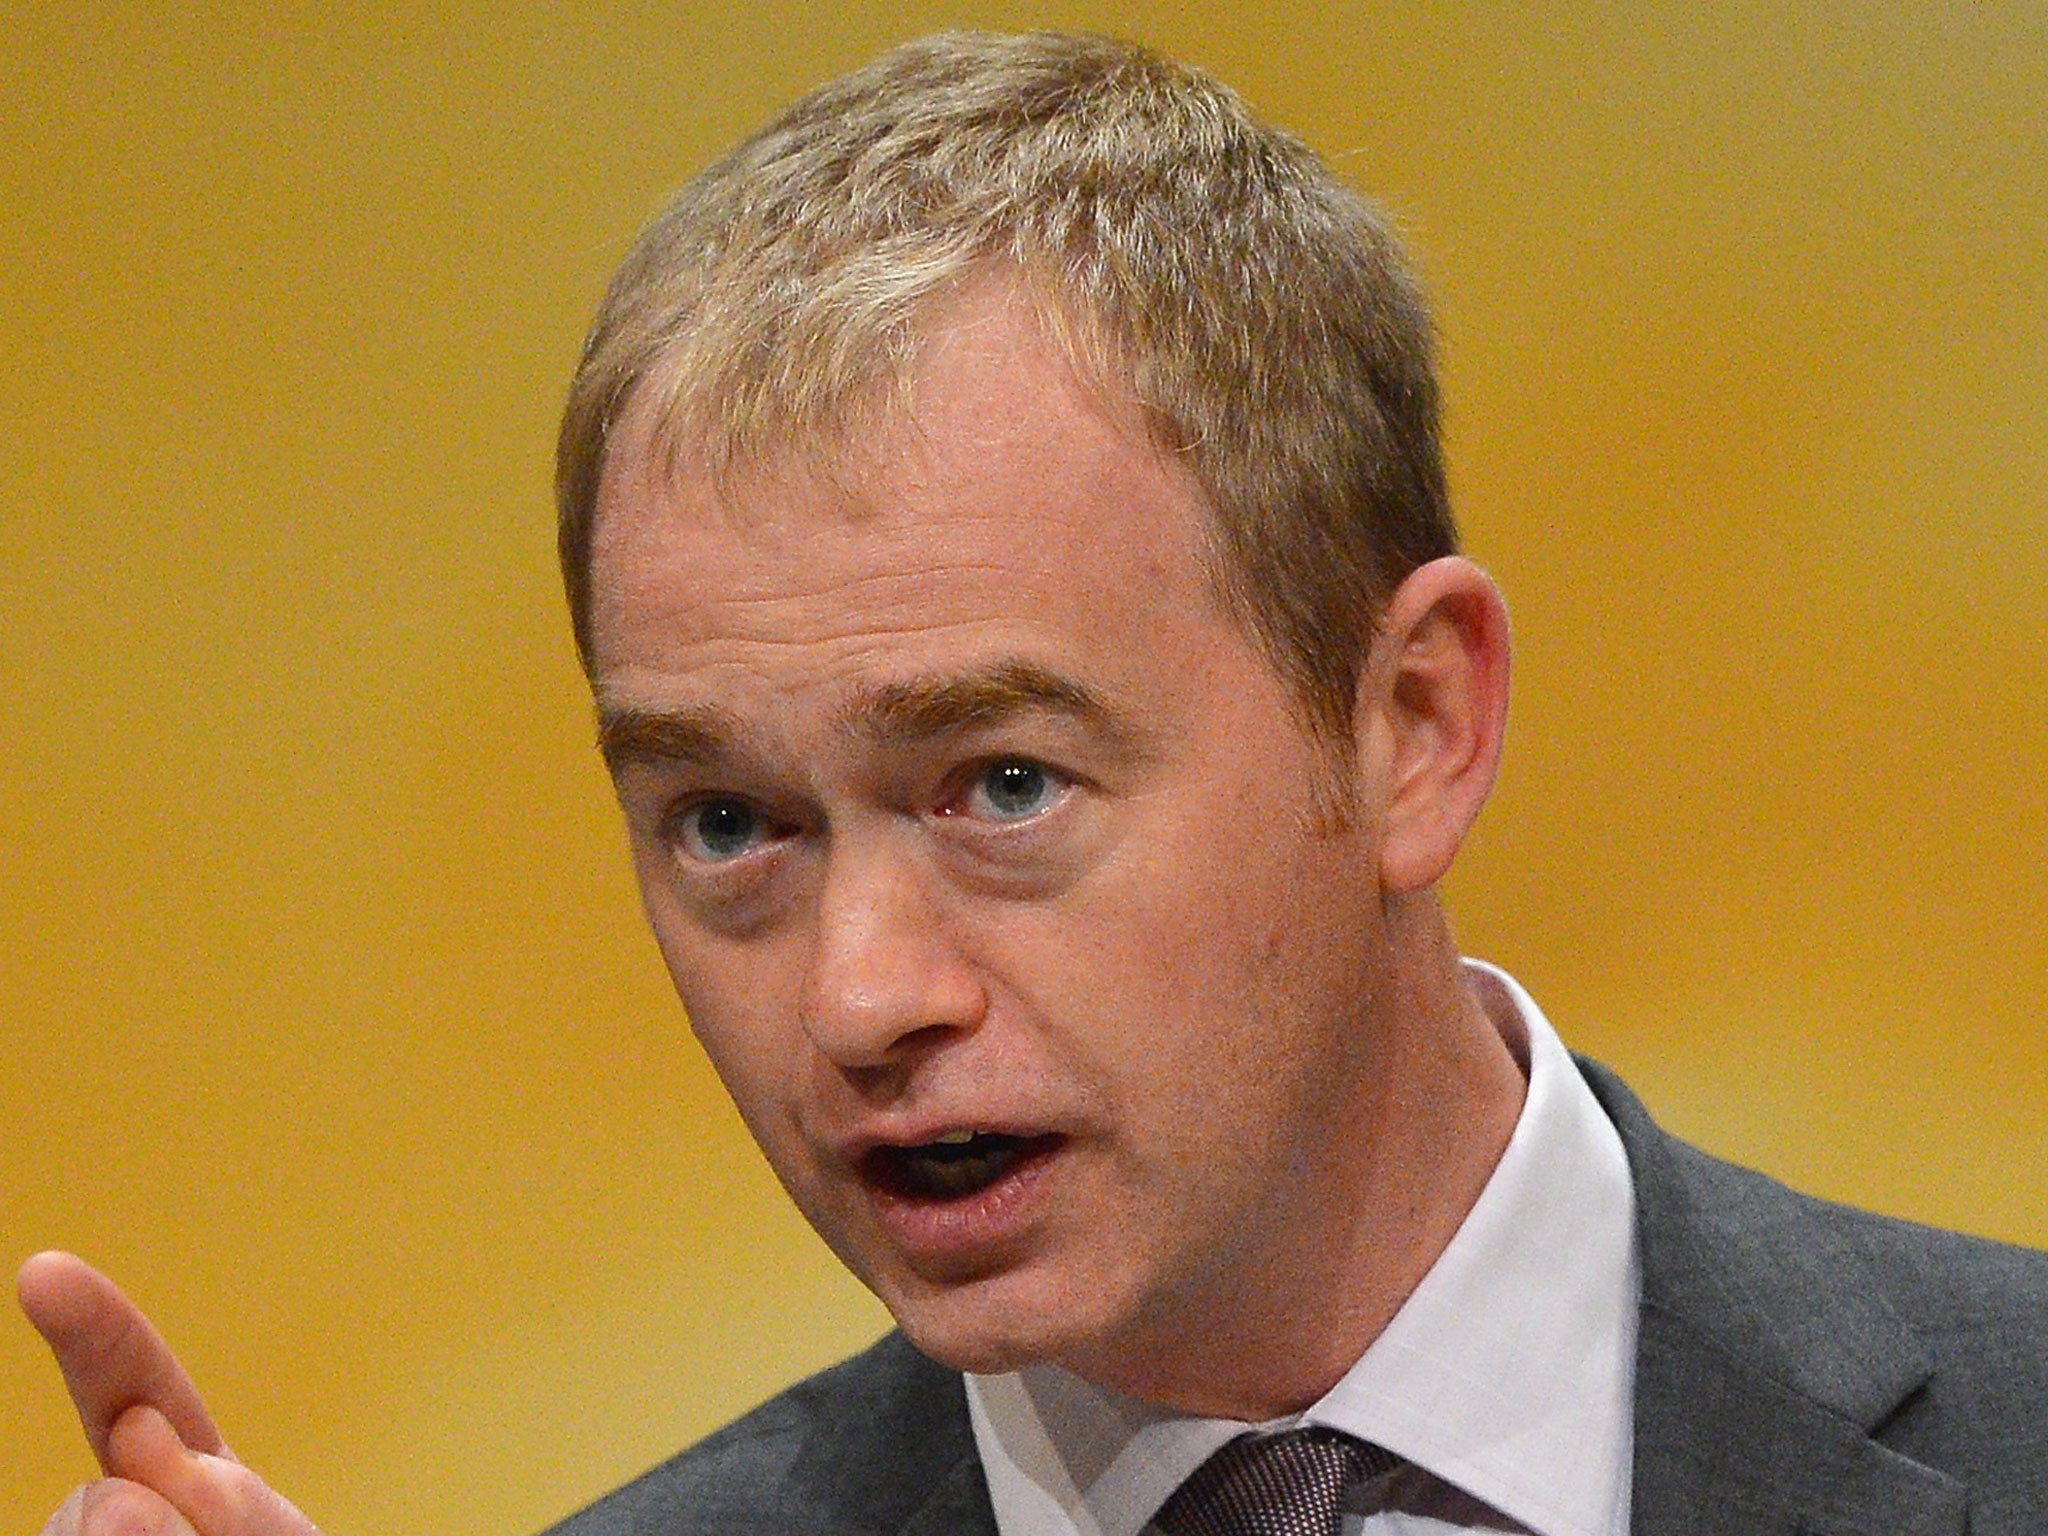 Tim Farron speaks at the Liberal Democrat conference on September 23, 2012 in Brighton, England